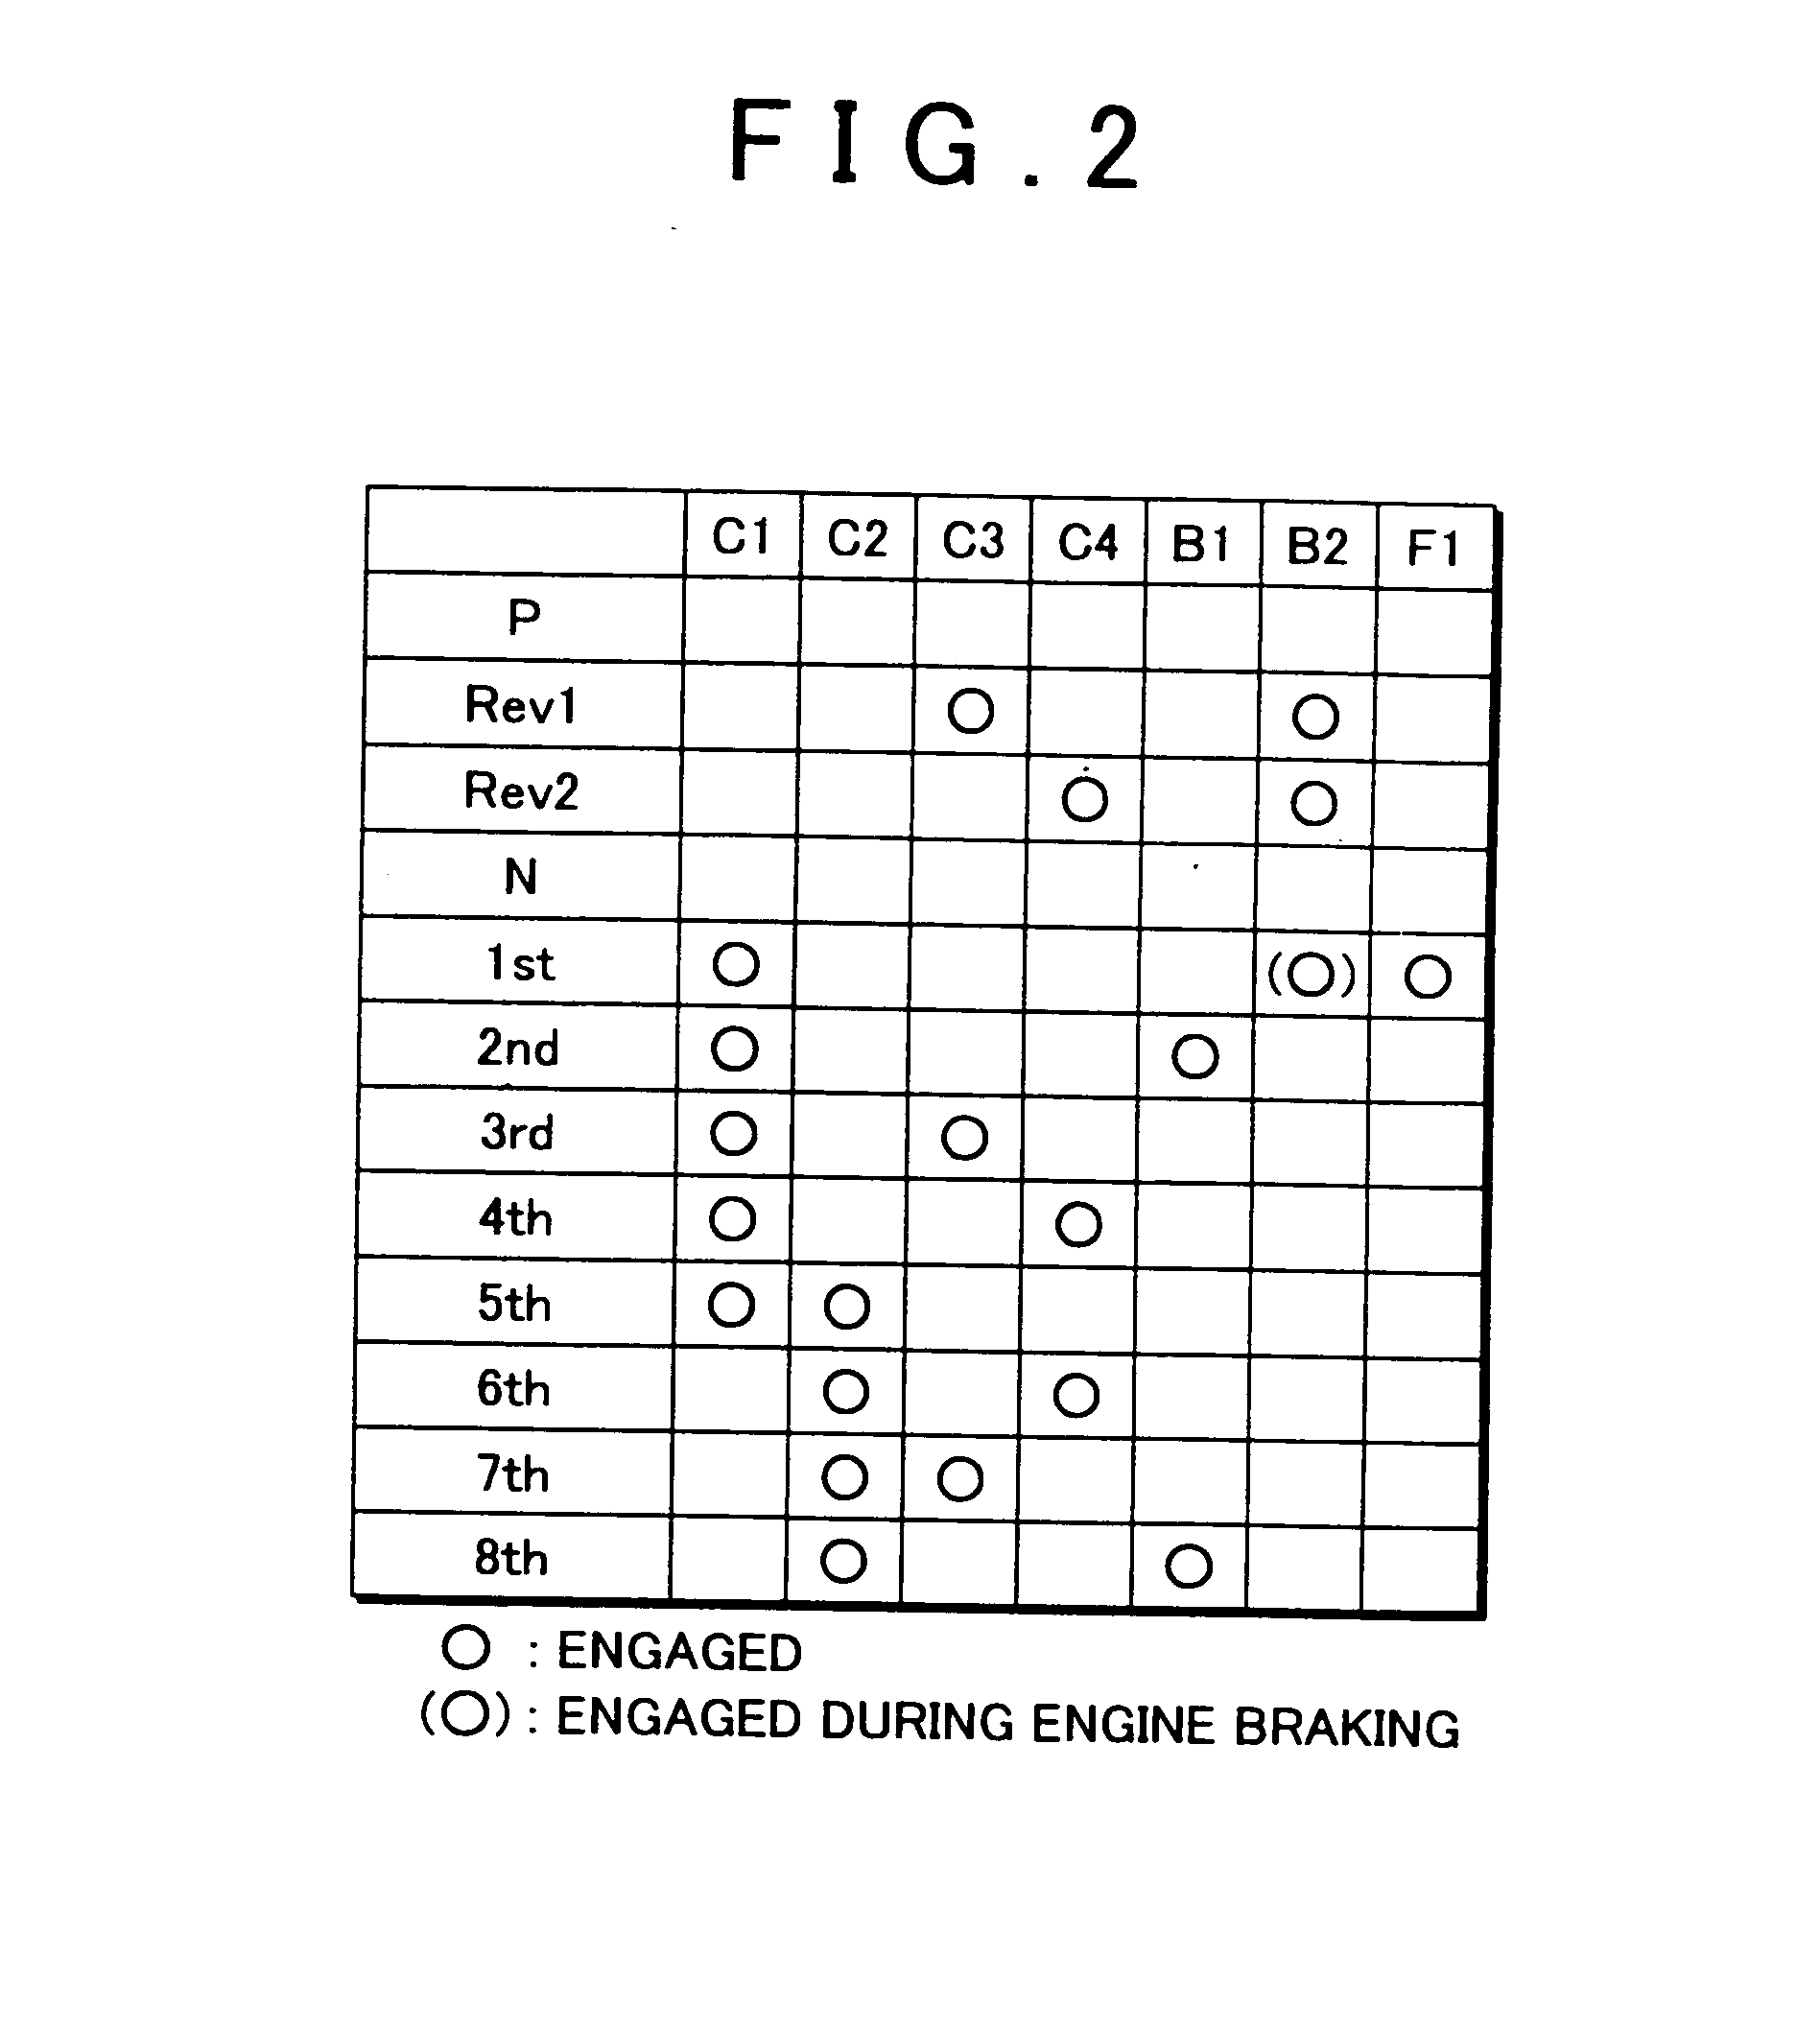 Control apparatus and control method of an automatic transmission